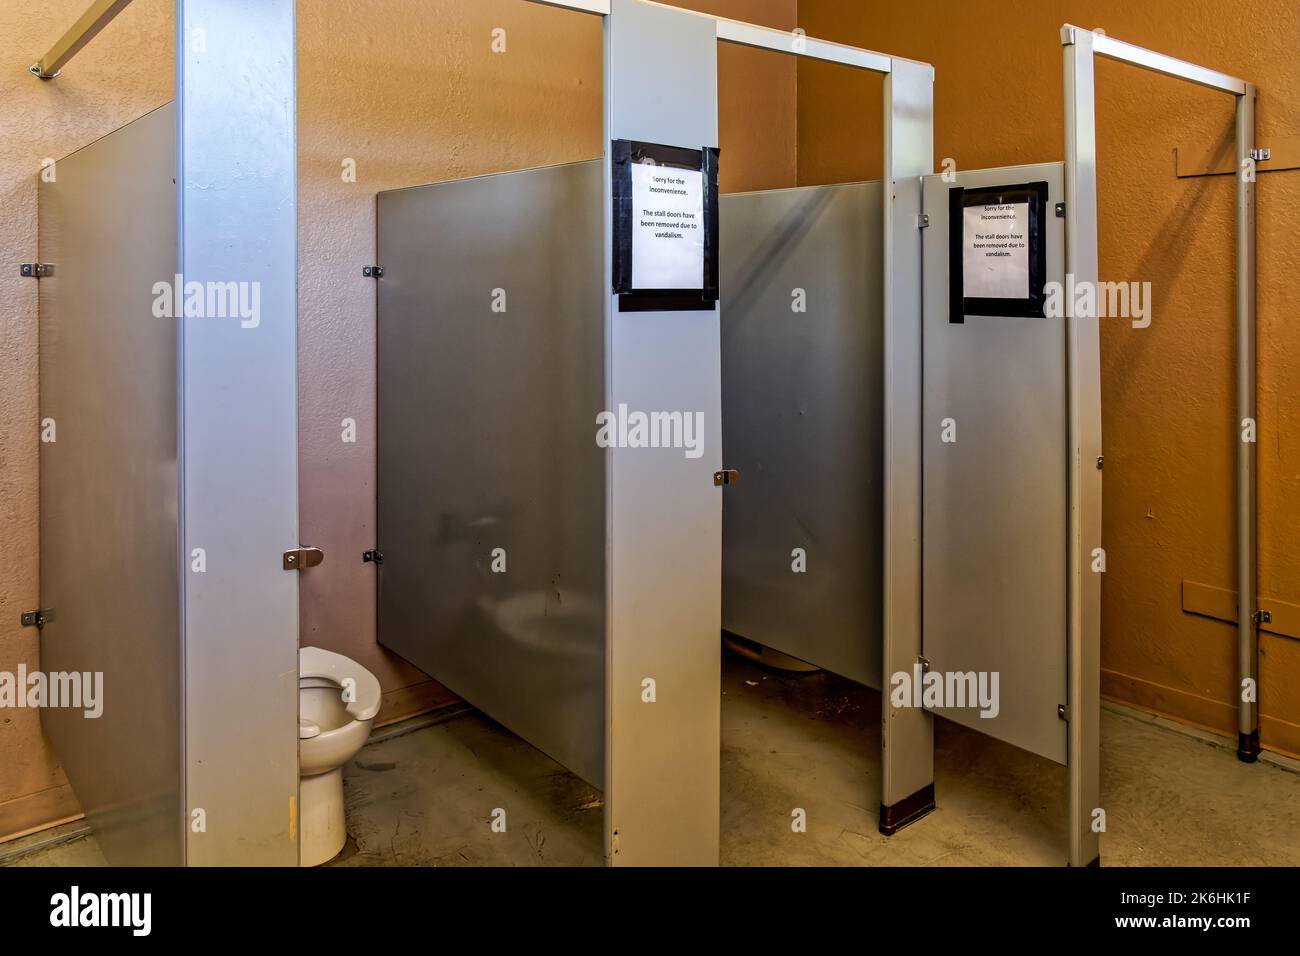 Womens restroom with stall doors removed. Sign says Sorry for the inconvenience.. The stall doors have been rmoved due to vandalism Stock Photo